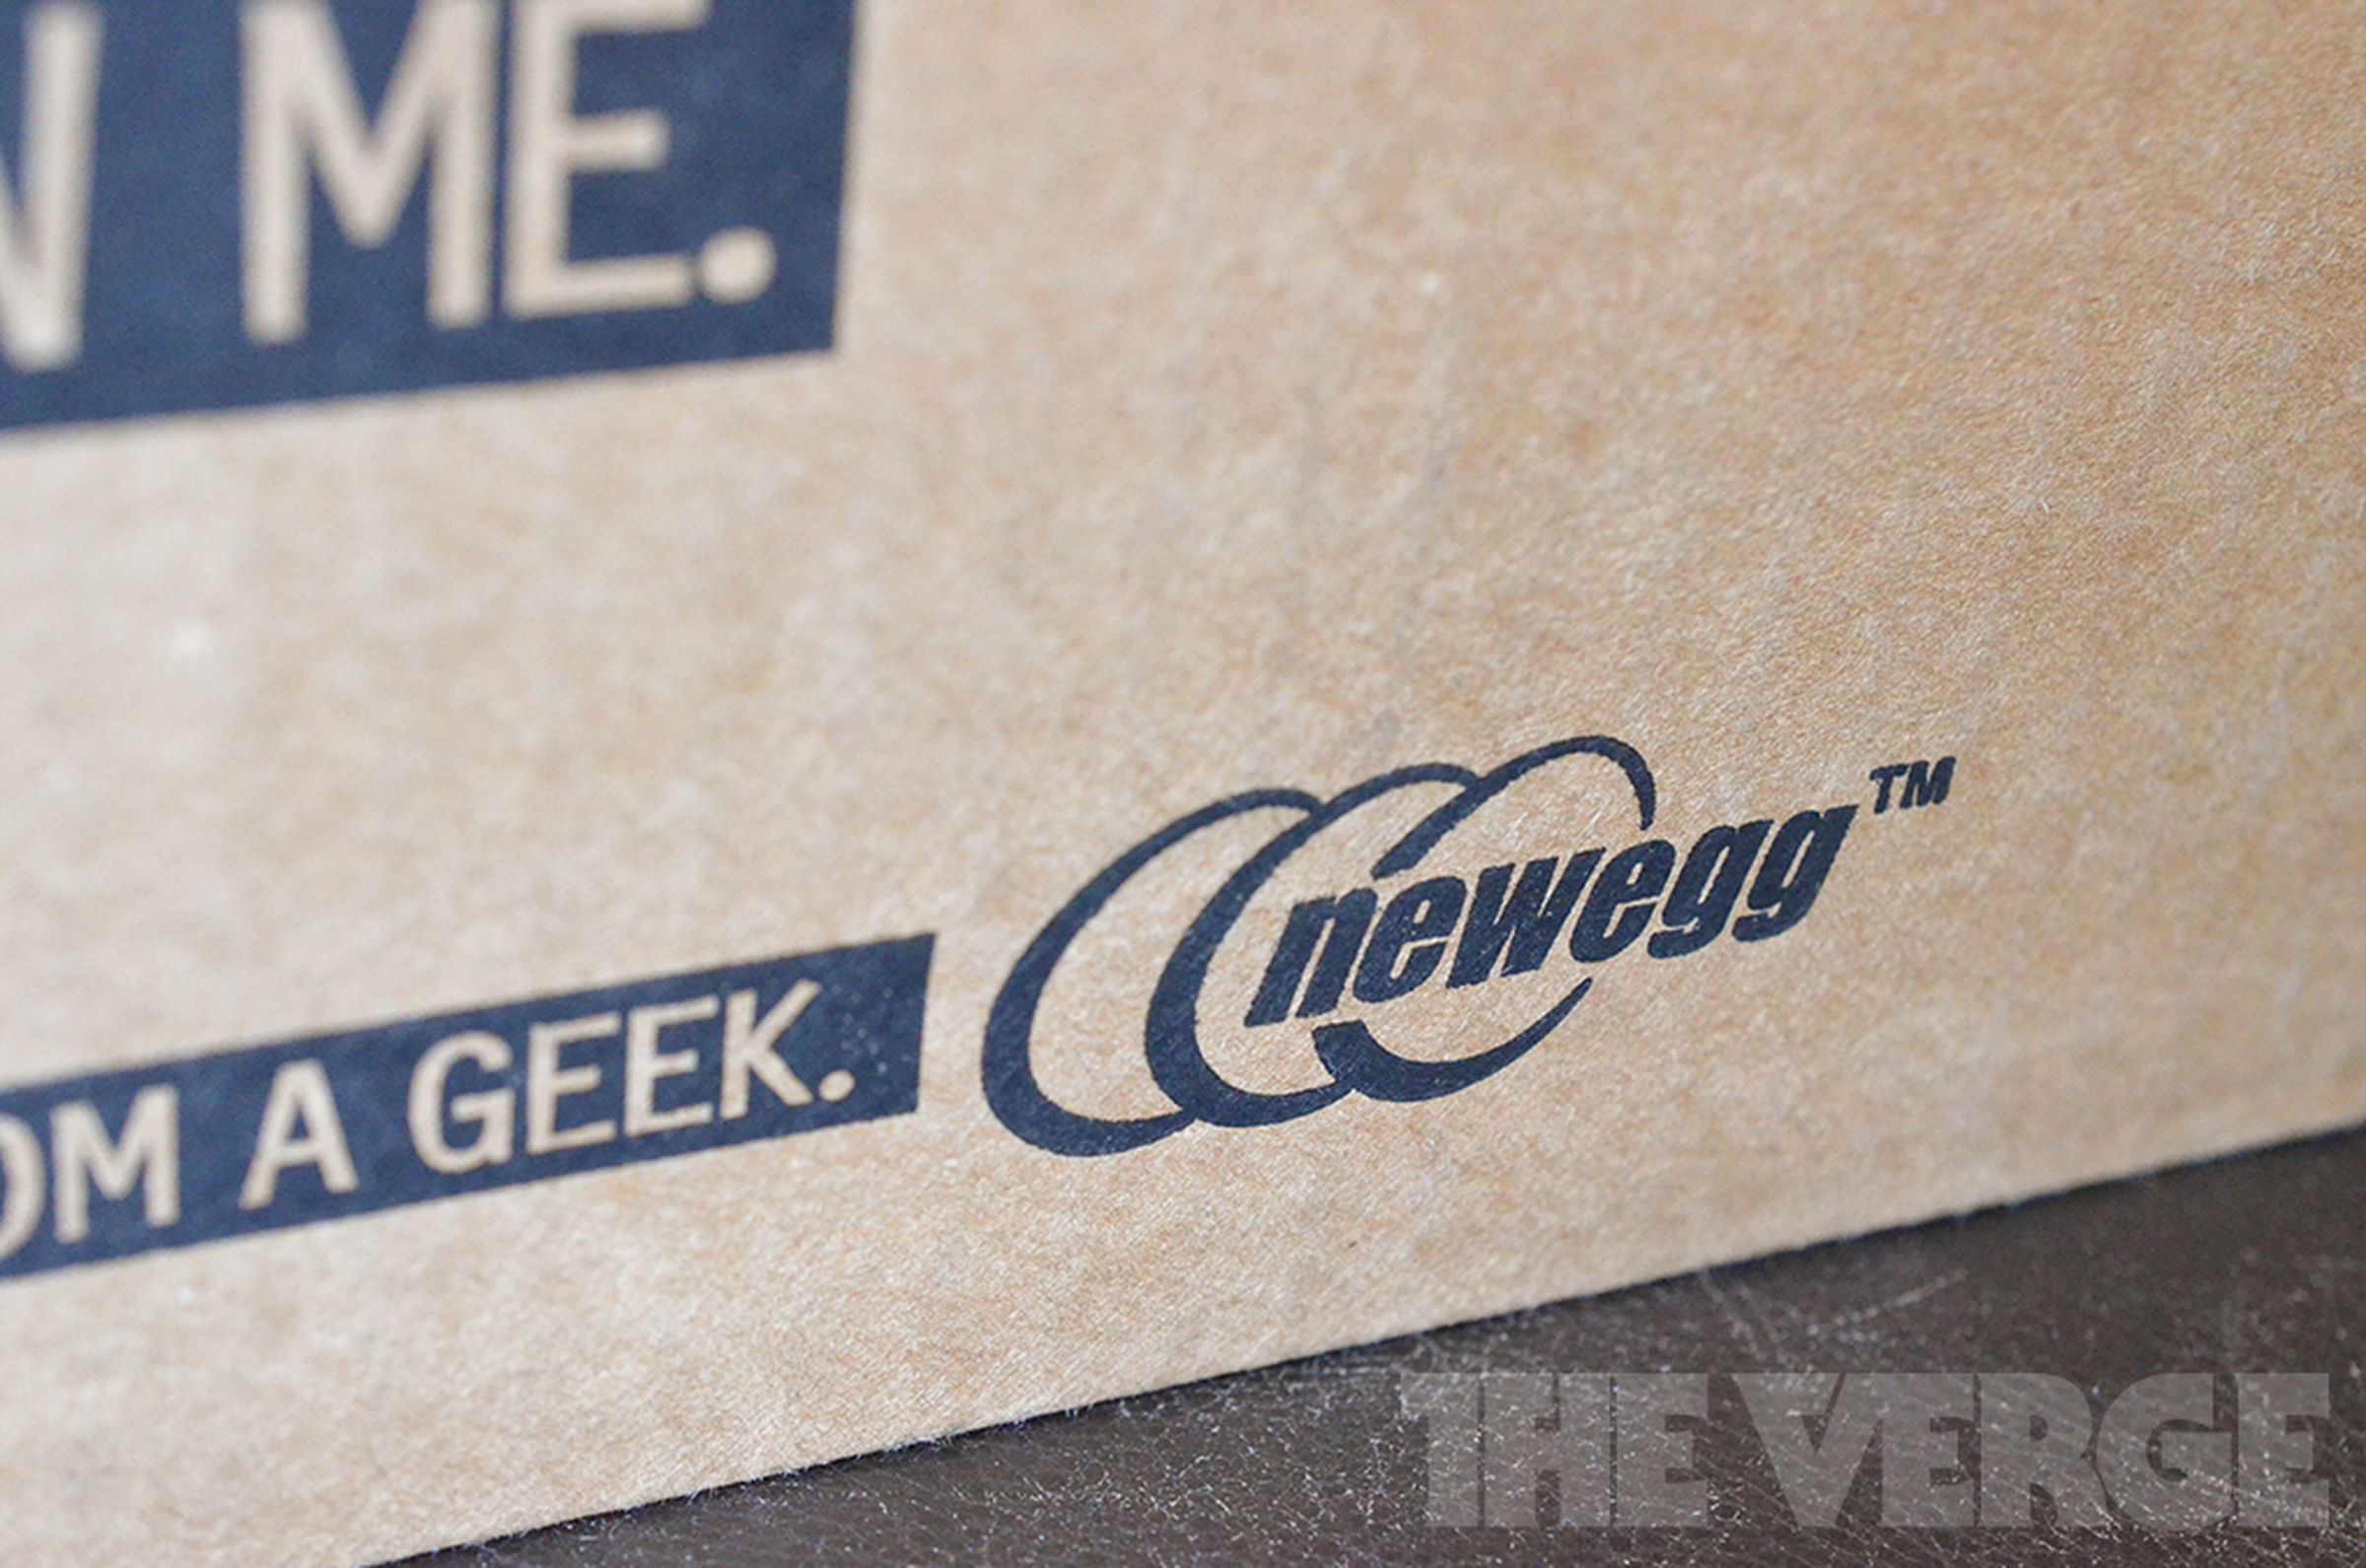 Image of the Newegg logo on a brown box